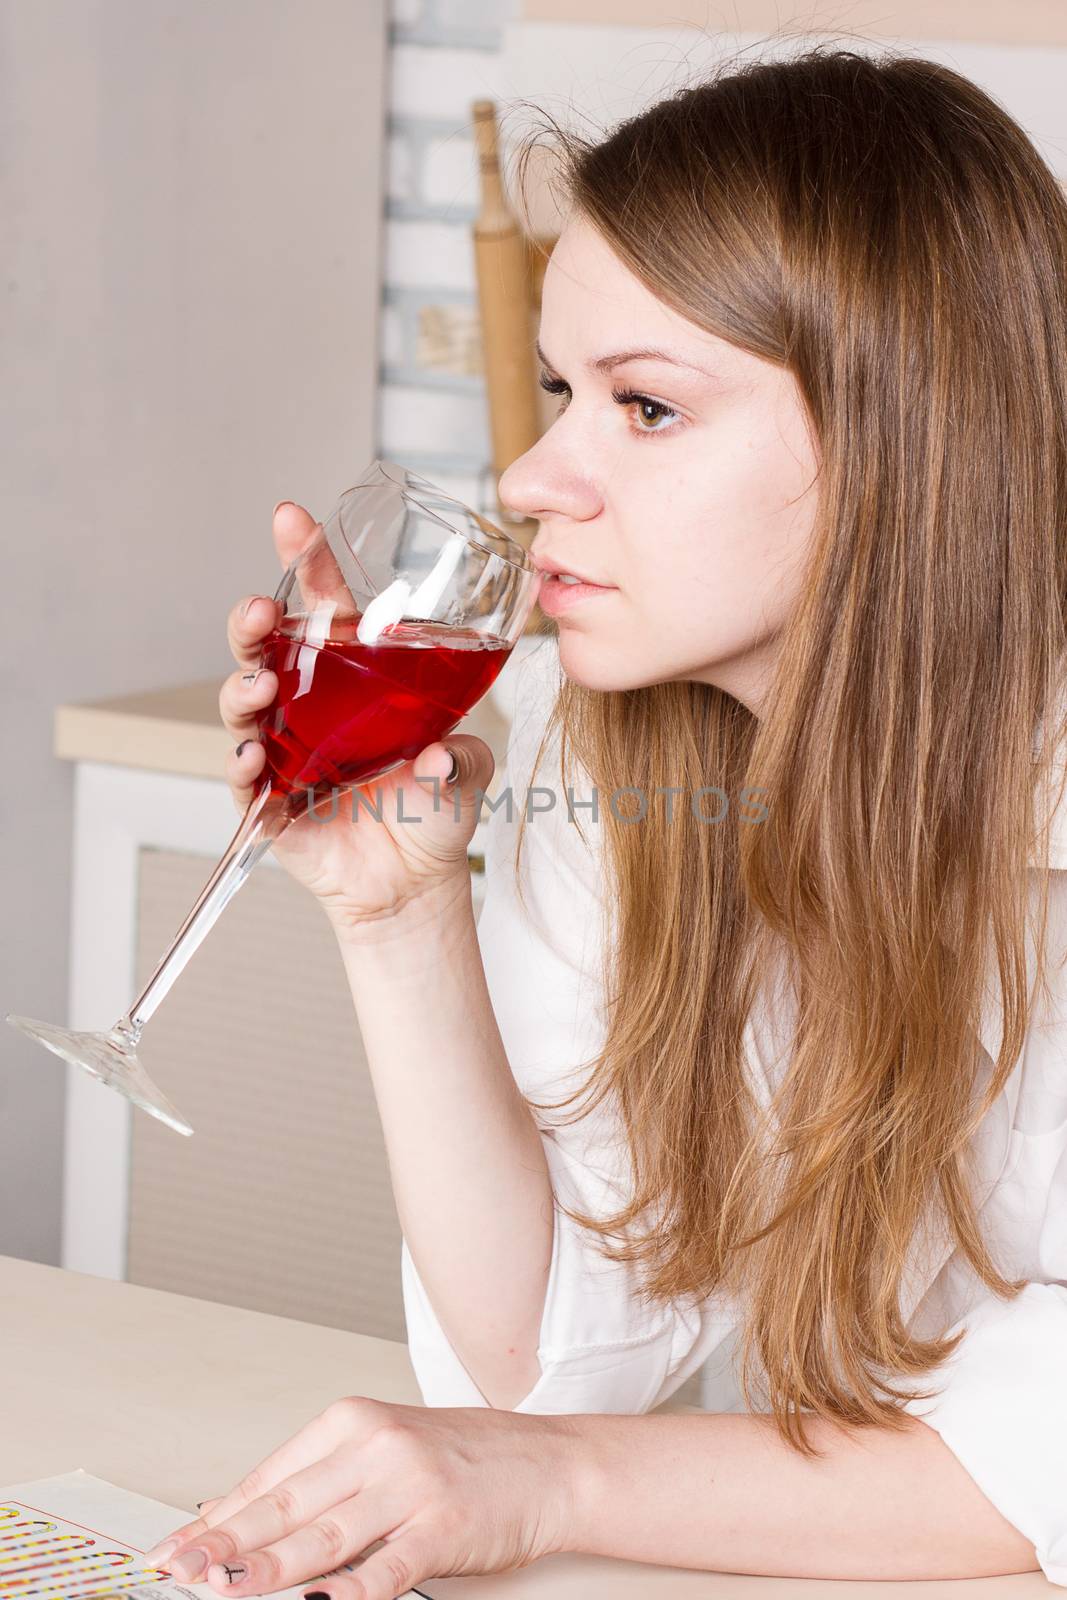 Woman drinking red wine in the kitchen